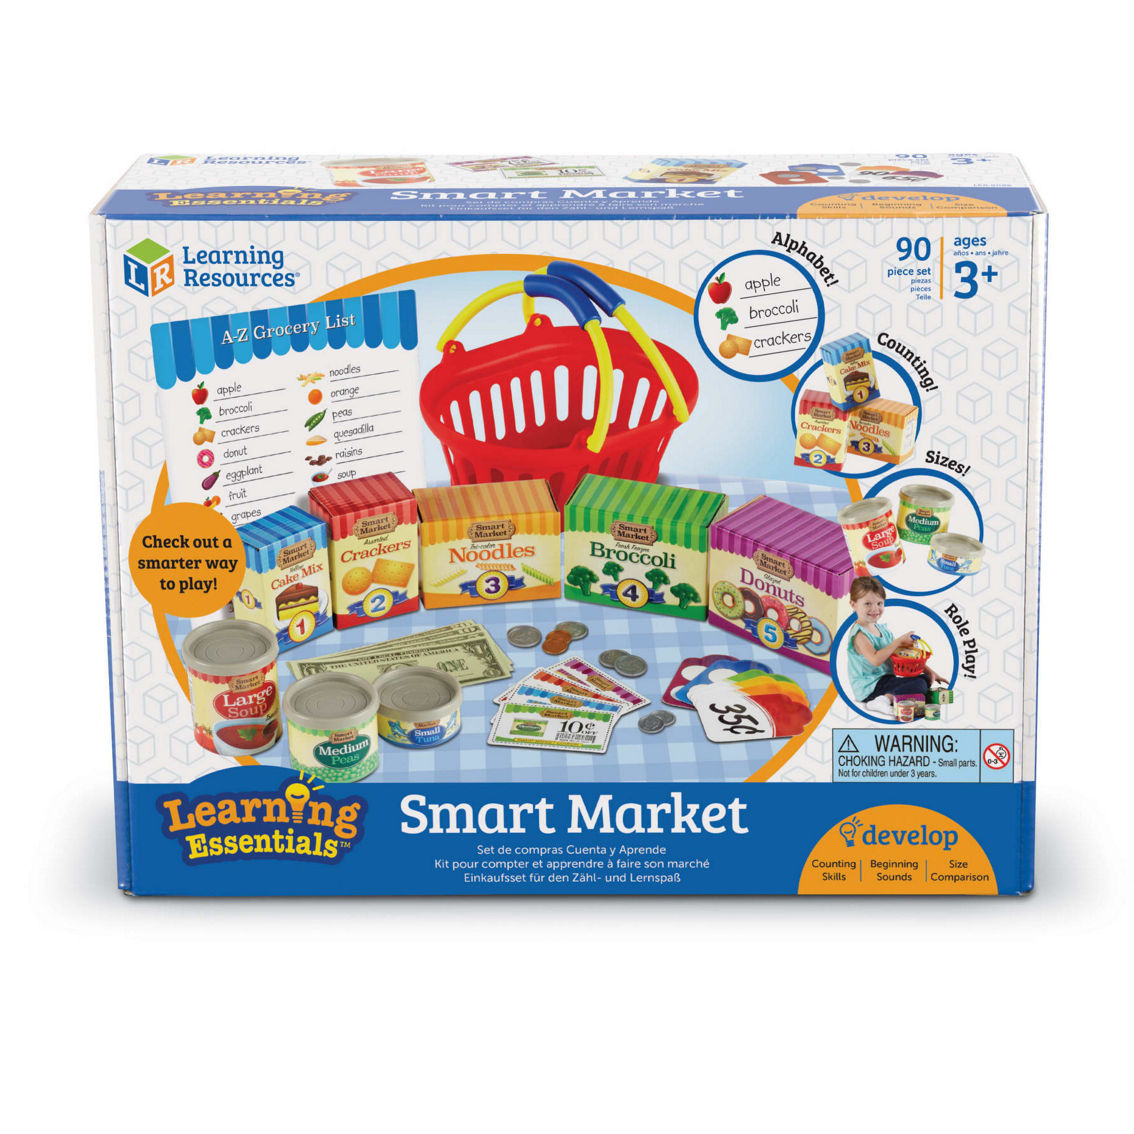 Learning Resources Learning Essentials - Smart Market - Image 4 of 5